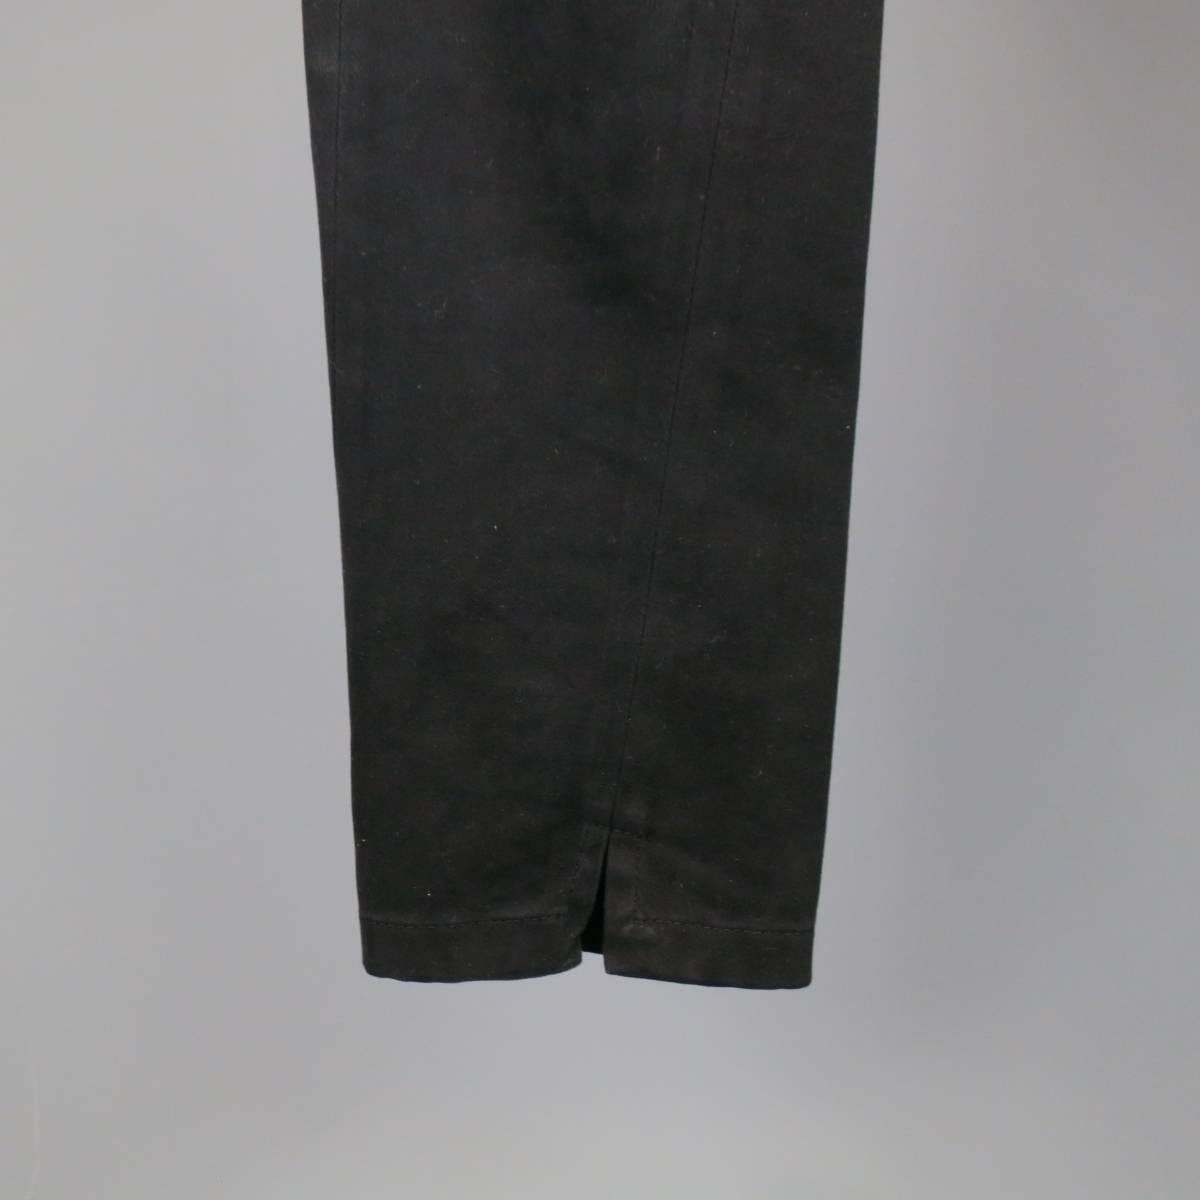 ANN DEMEULEMEESTER pants in a washed rust red stretch cotton twill with black dip dye ombre effect and slit hem.. Made in Italy.
 
Excellent Pre-Owned Condition.
Marked: S
 
Measurements:
 
Waist: 34 in.
Rise: 10.5 in.
Inseam: 31 in.